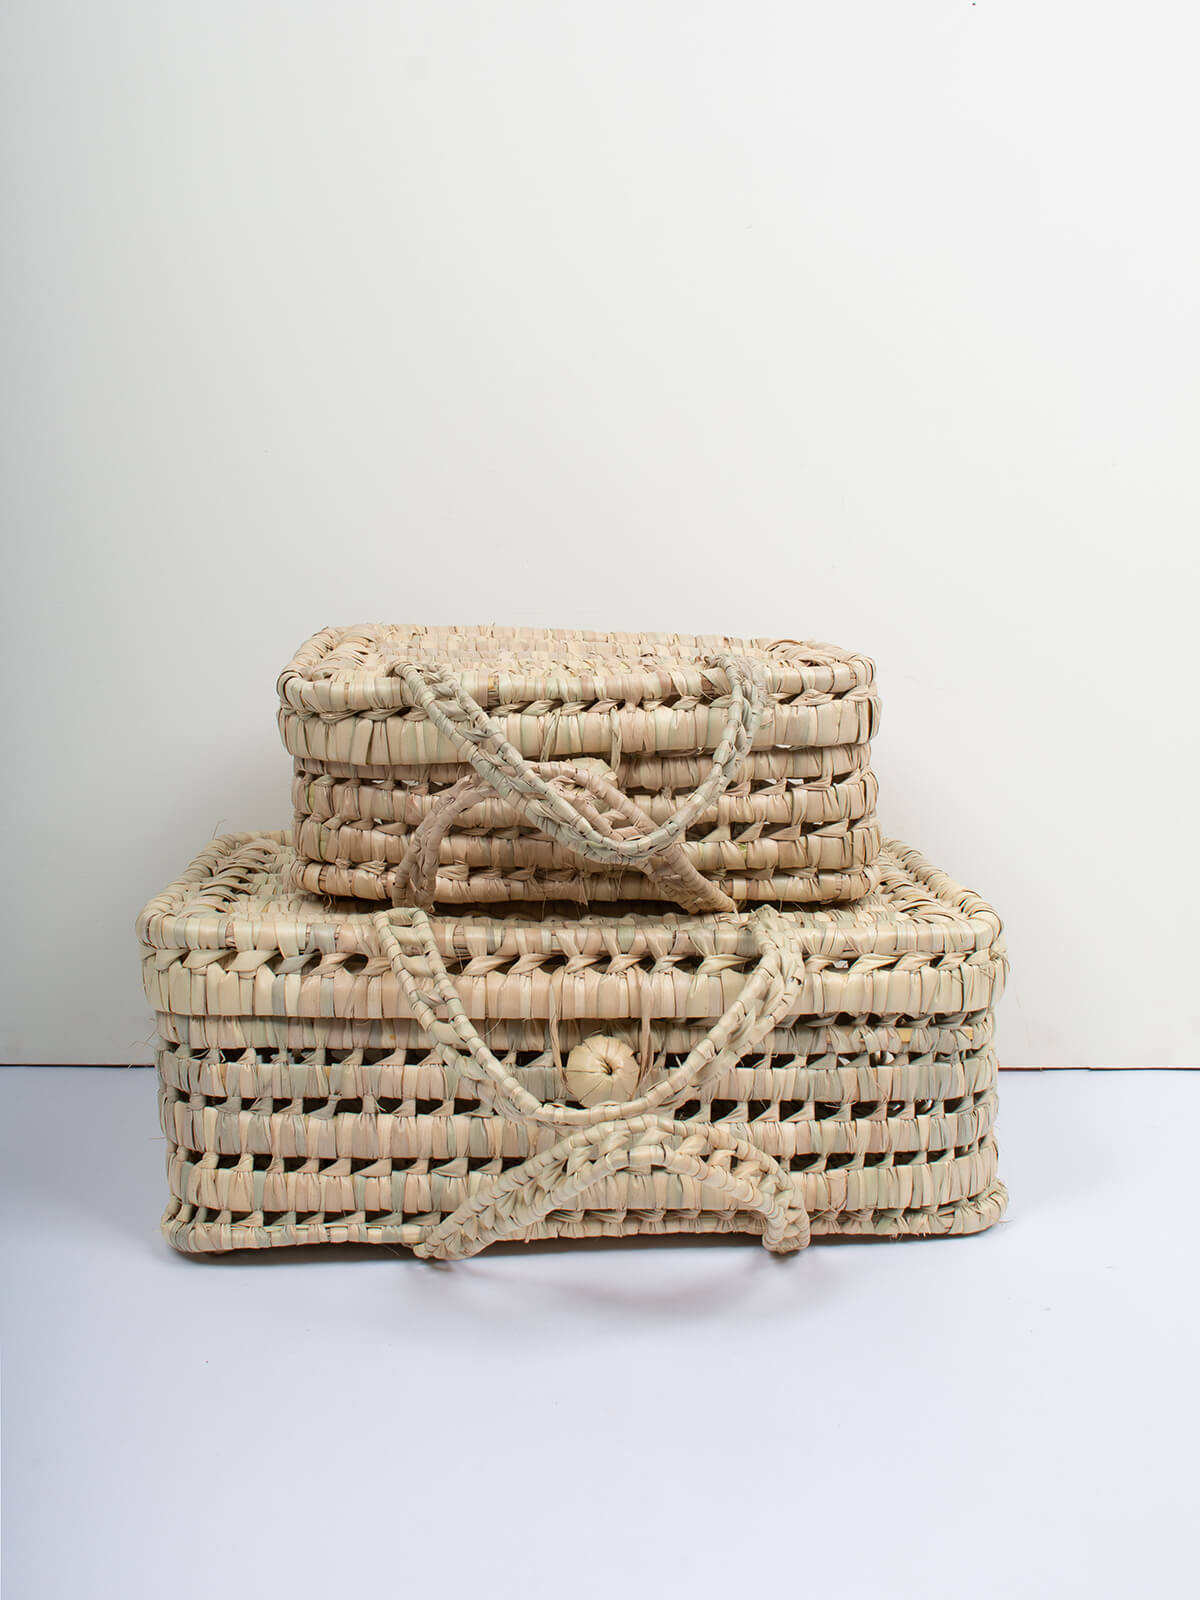 Woven Suitcase